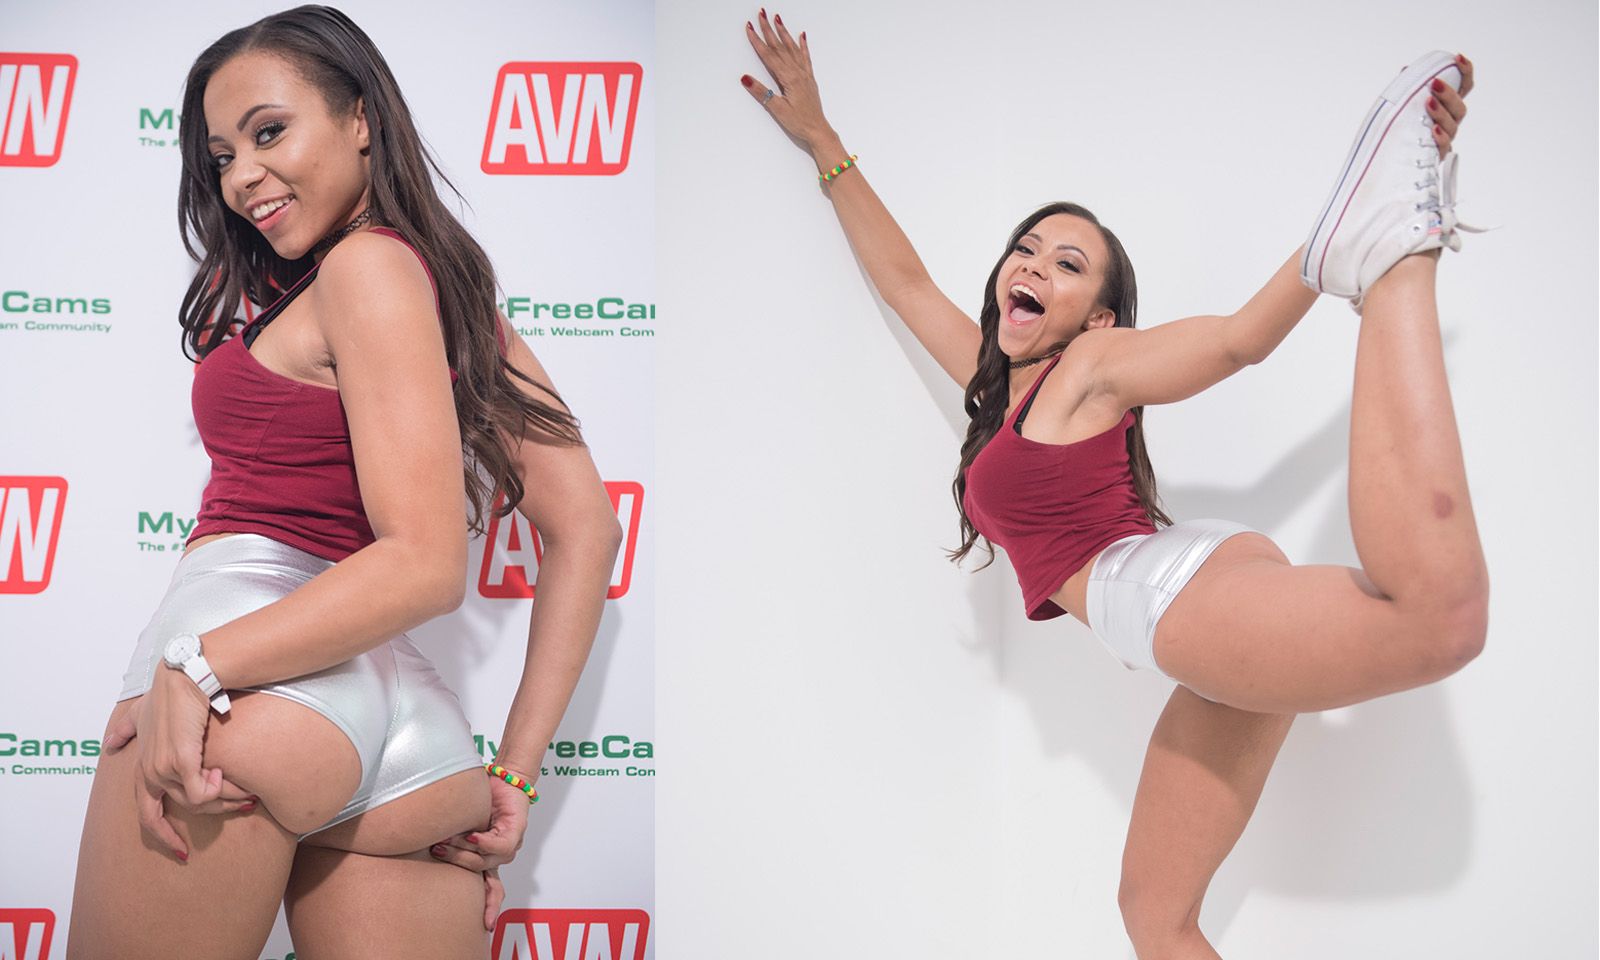 Everything Butt: Interview With Adriana Maya | AVN